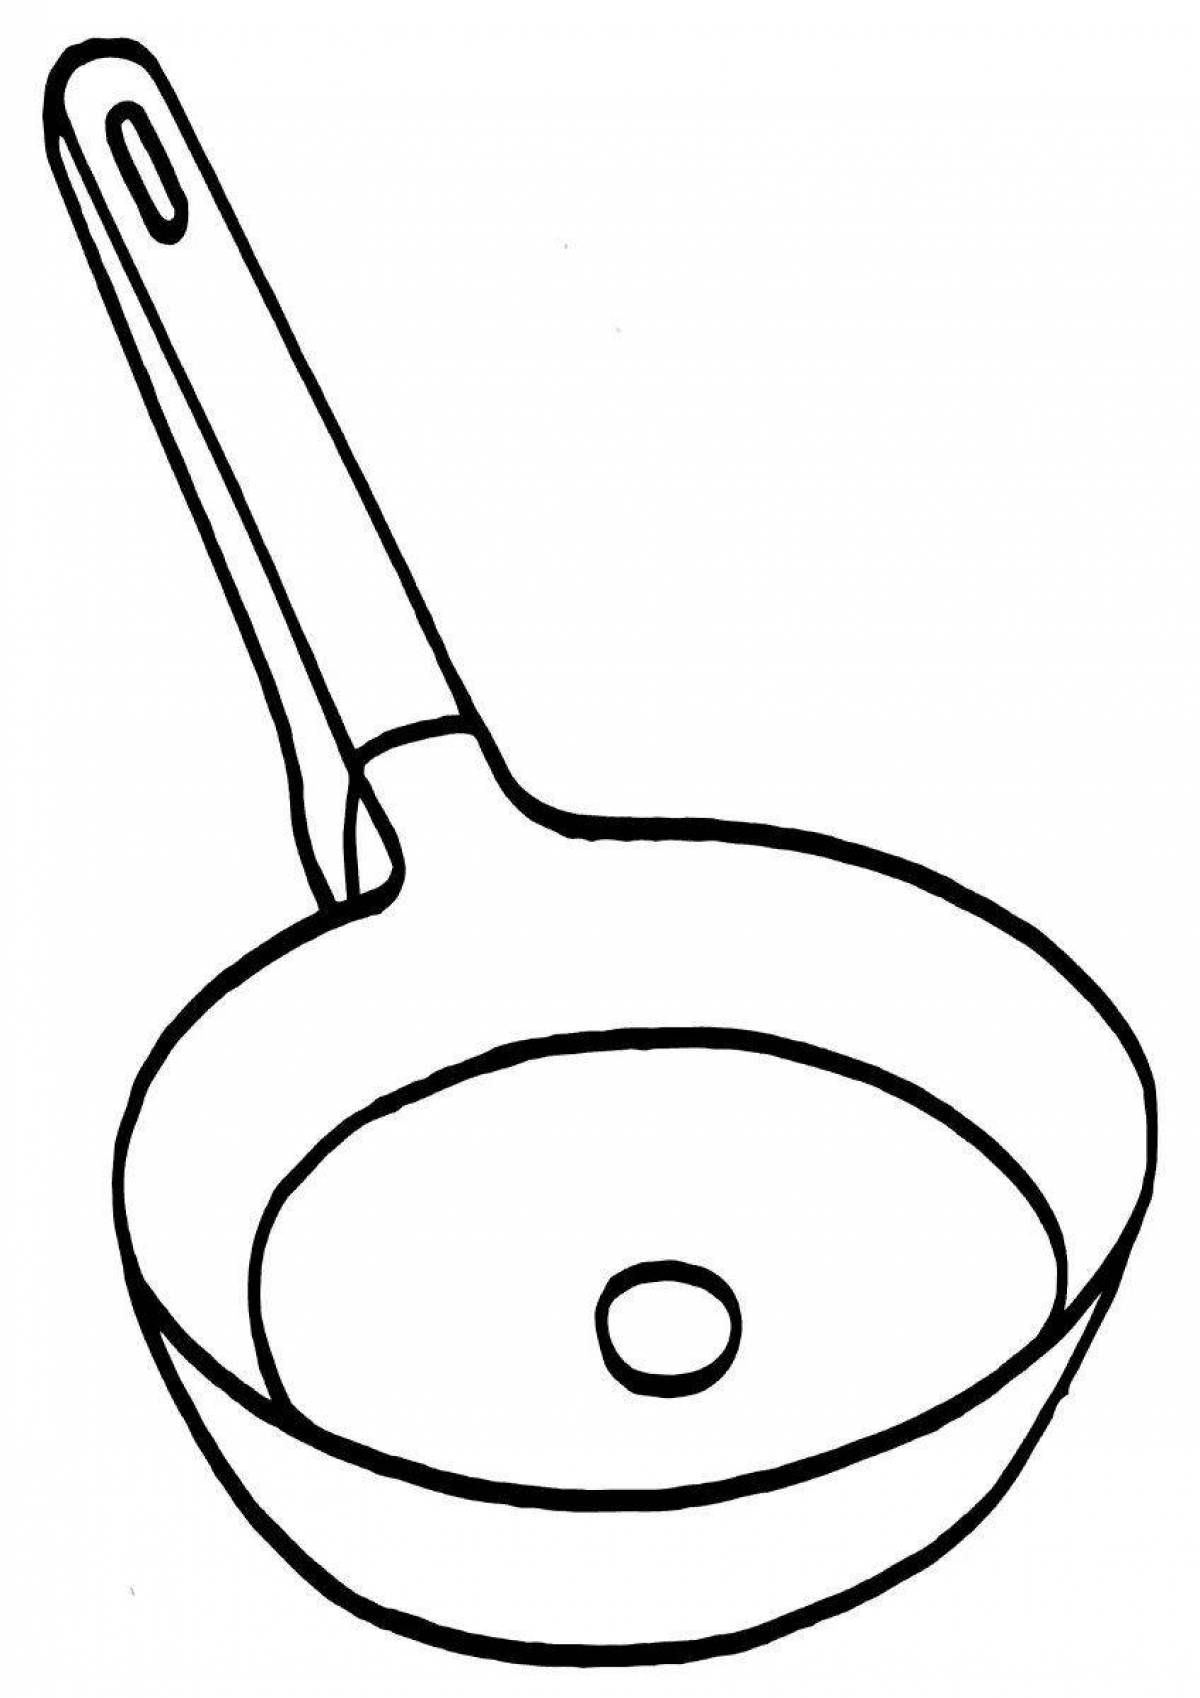 Mystical frying pan coloring page